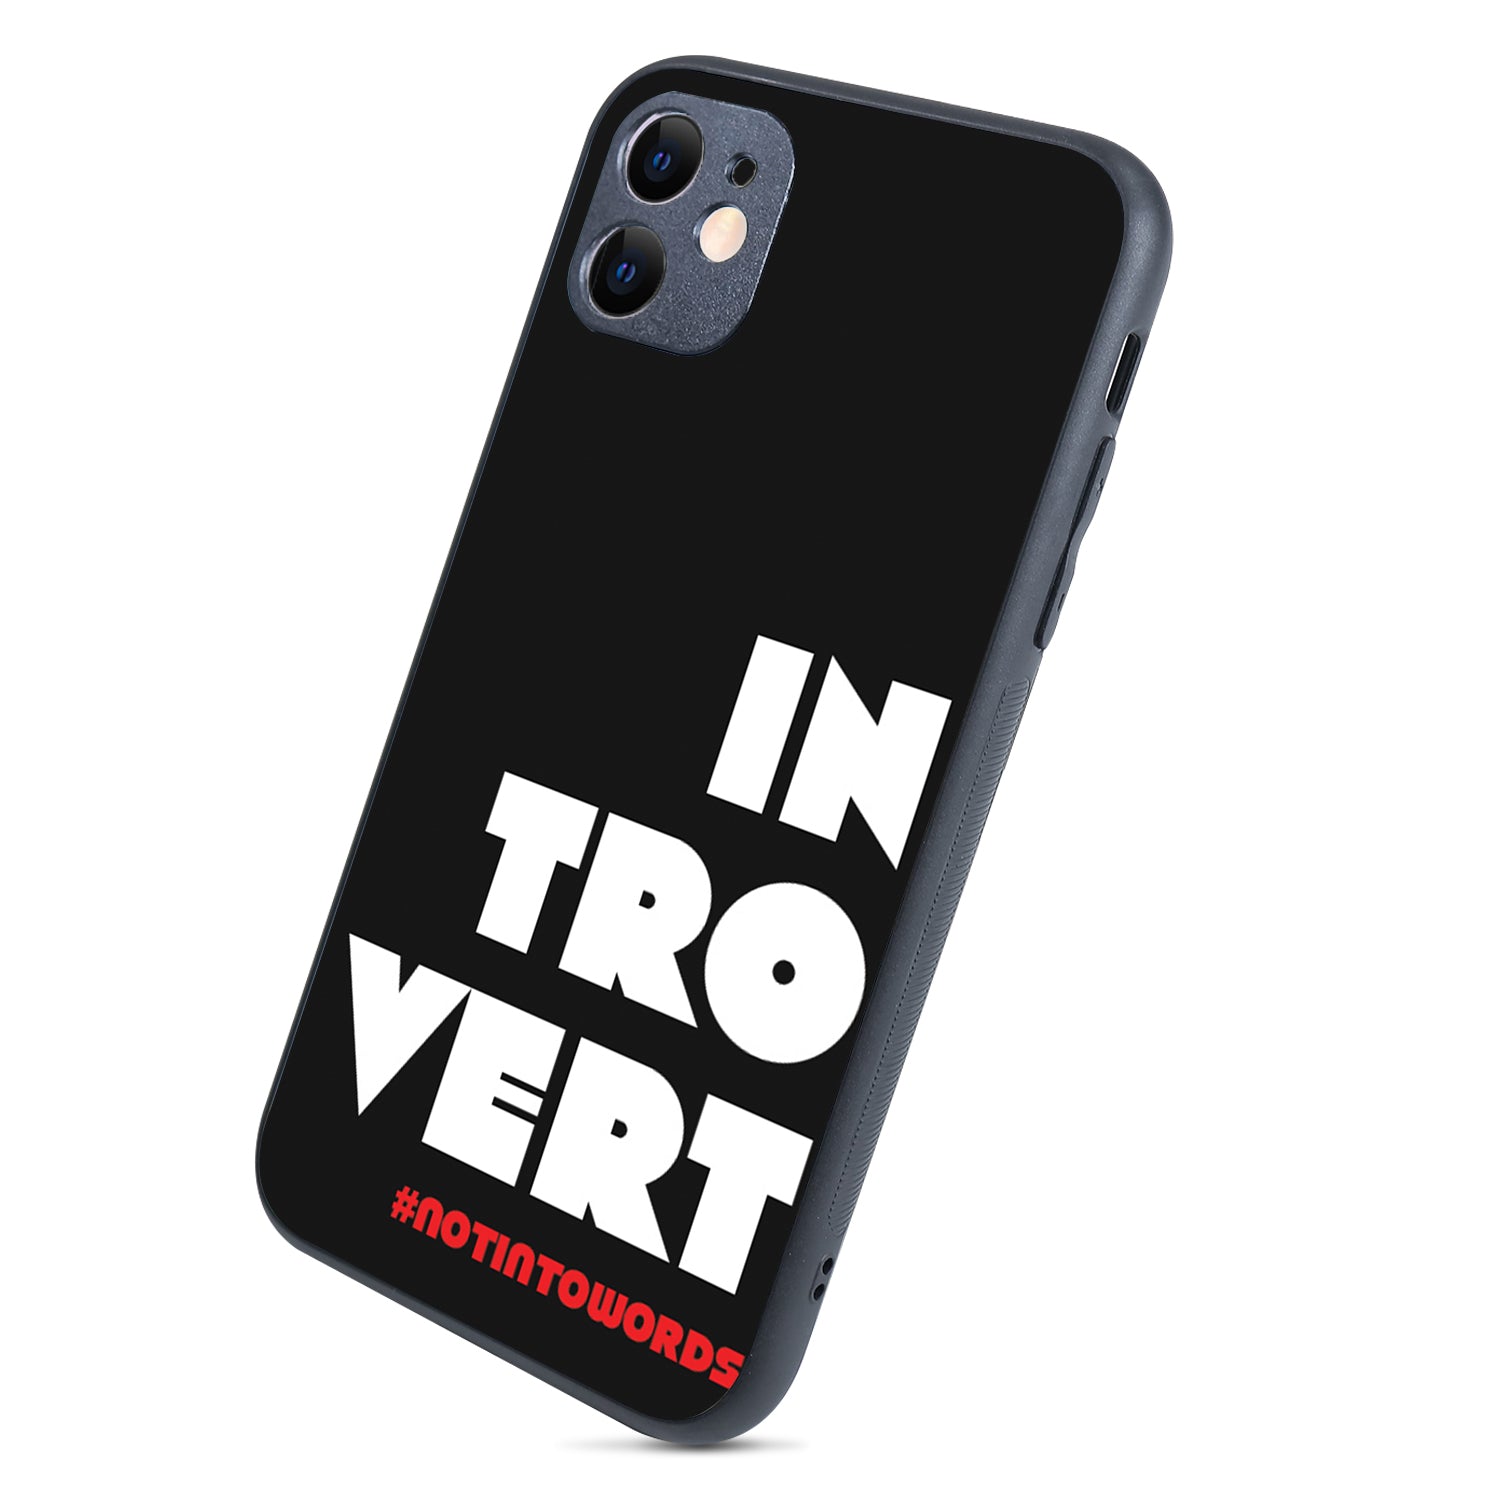 Introvert Motivational Quotes iPhone 11 Case